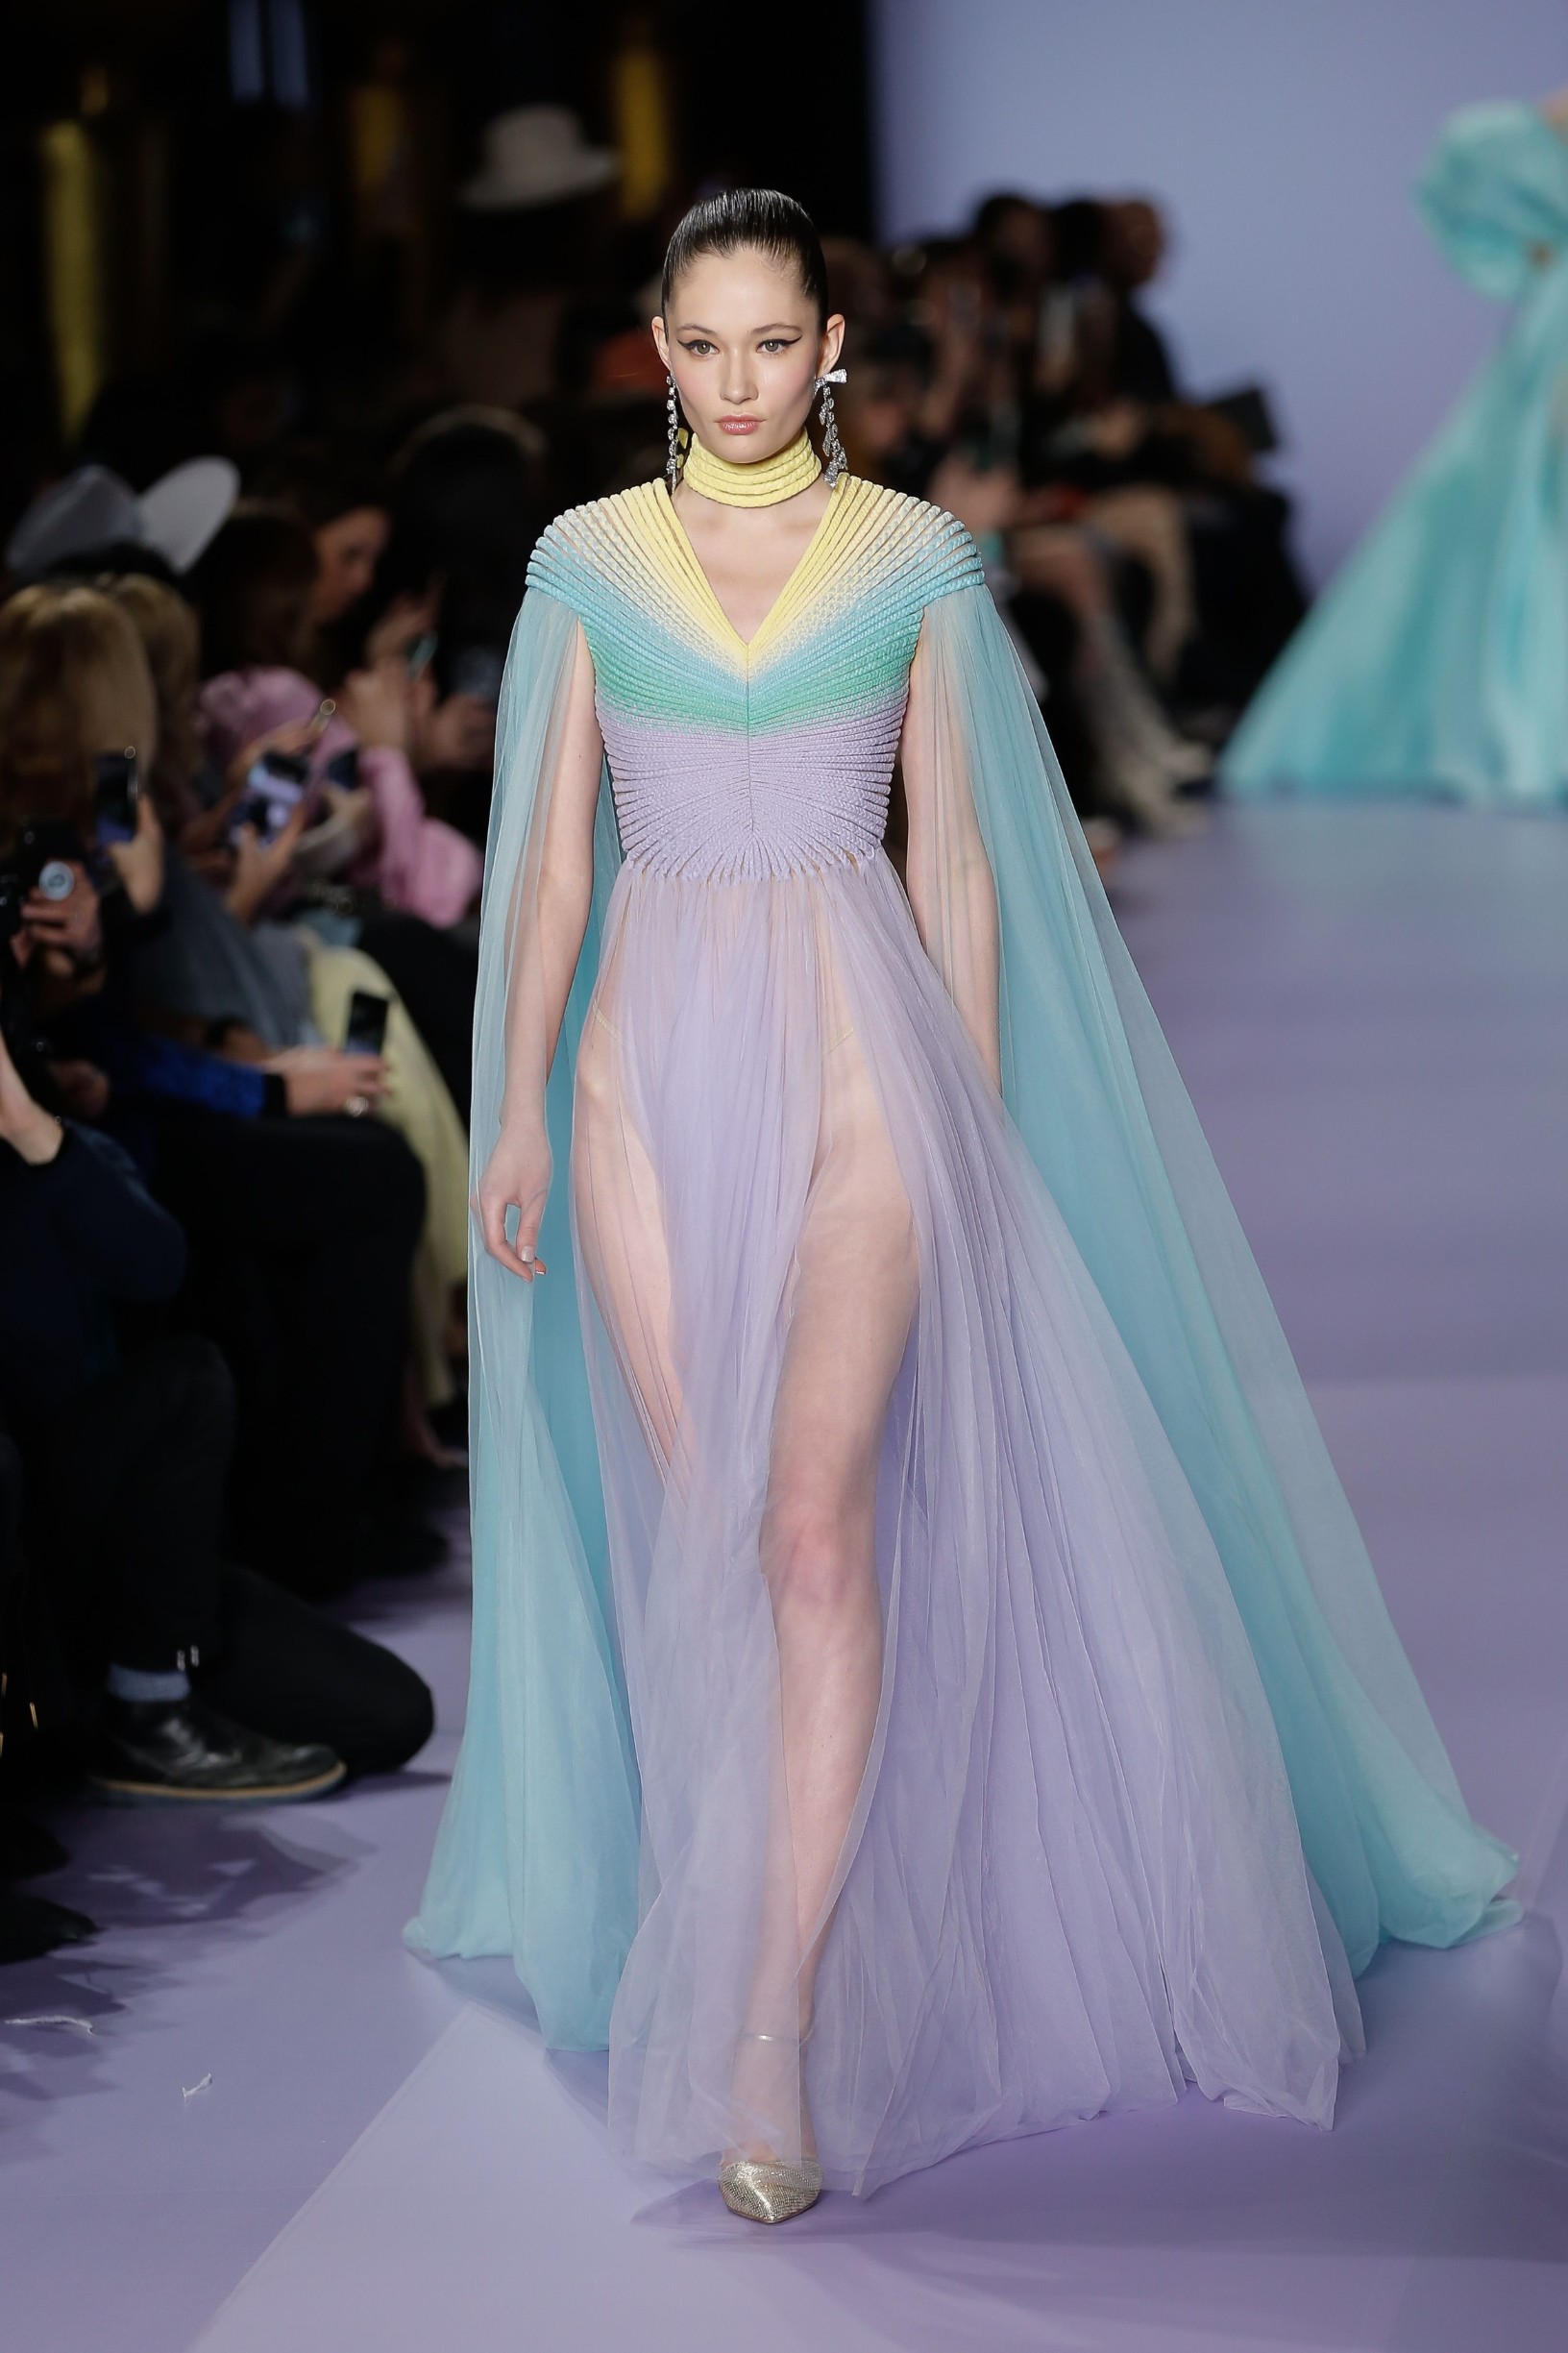 A model walks the runway at the Georges Hobeika fashion show as part of the Paris Fashion Week - Haute Couture Spring/Summer 2020. - Paris, January 20 2020//03HAEDRICHJM__A2A2118/2001210840/Credit:J.M. HAEDRICH/SIPA/2001210842, Image: 493926232, License: Rights-managed, Restrictions: , Model Release: no, Credit line: J.M. HAEDRICH / Sipa Press / Profimedia